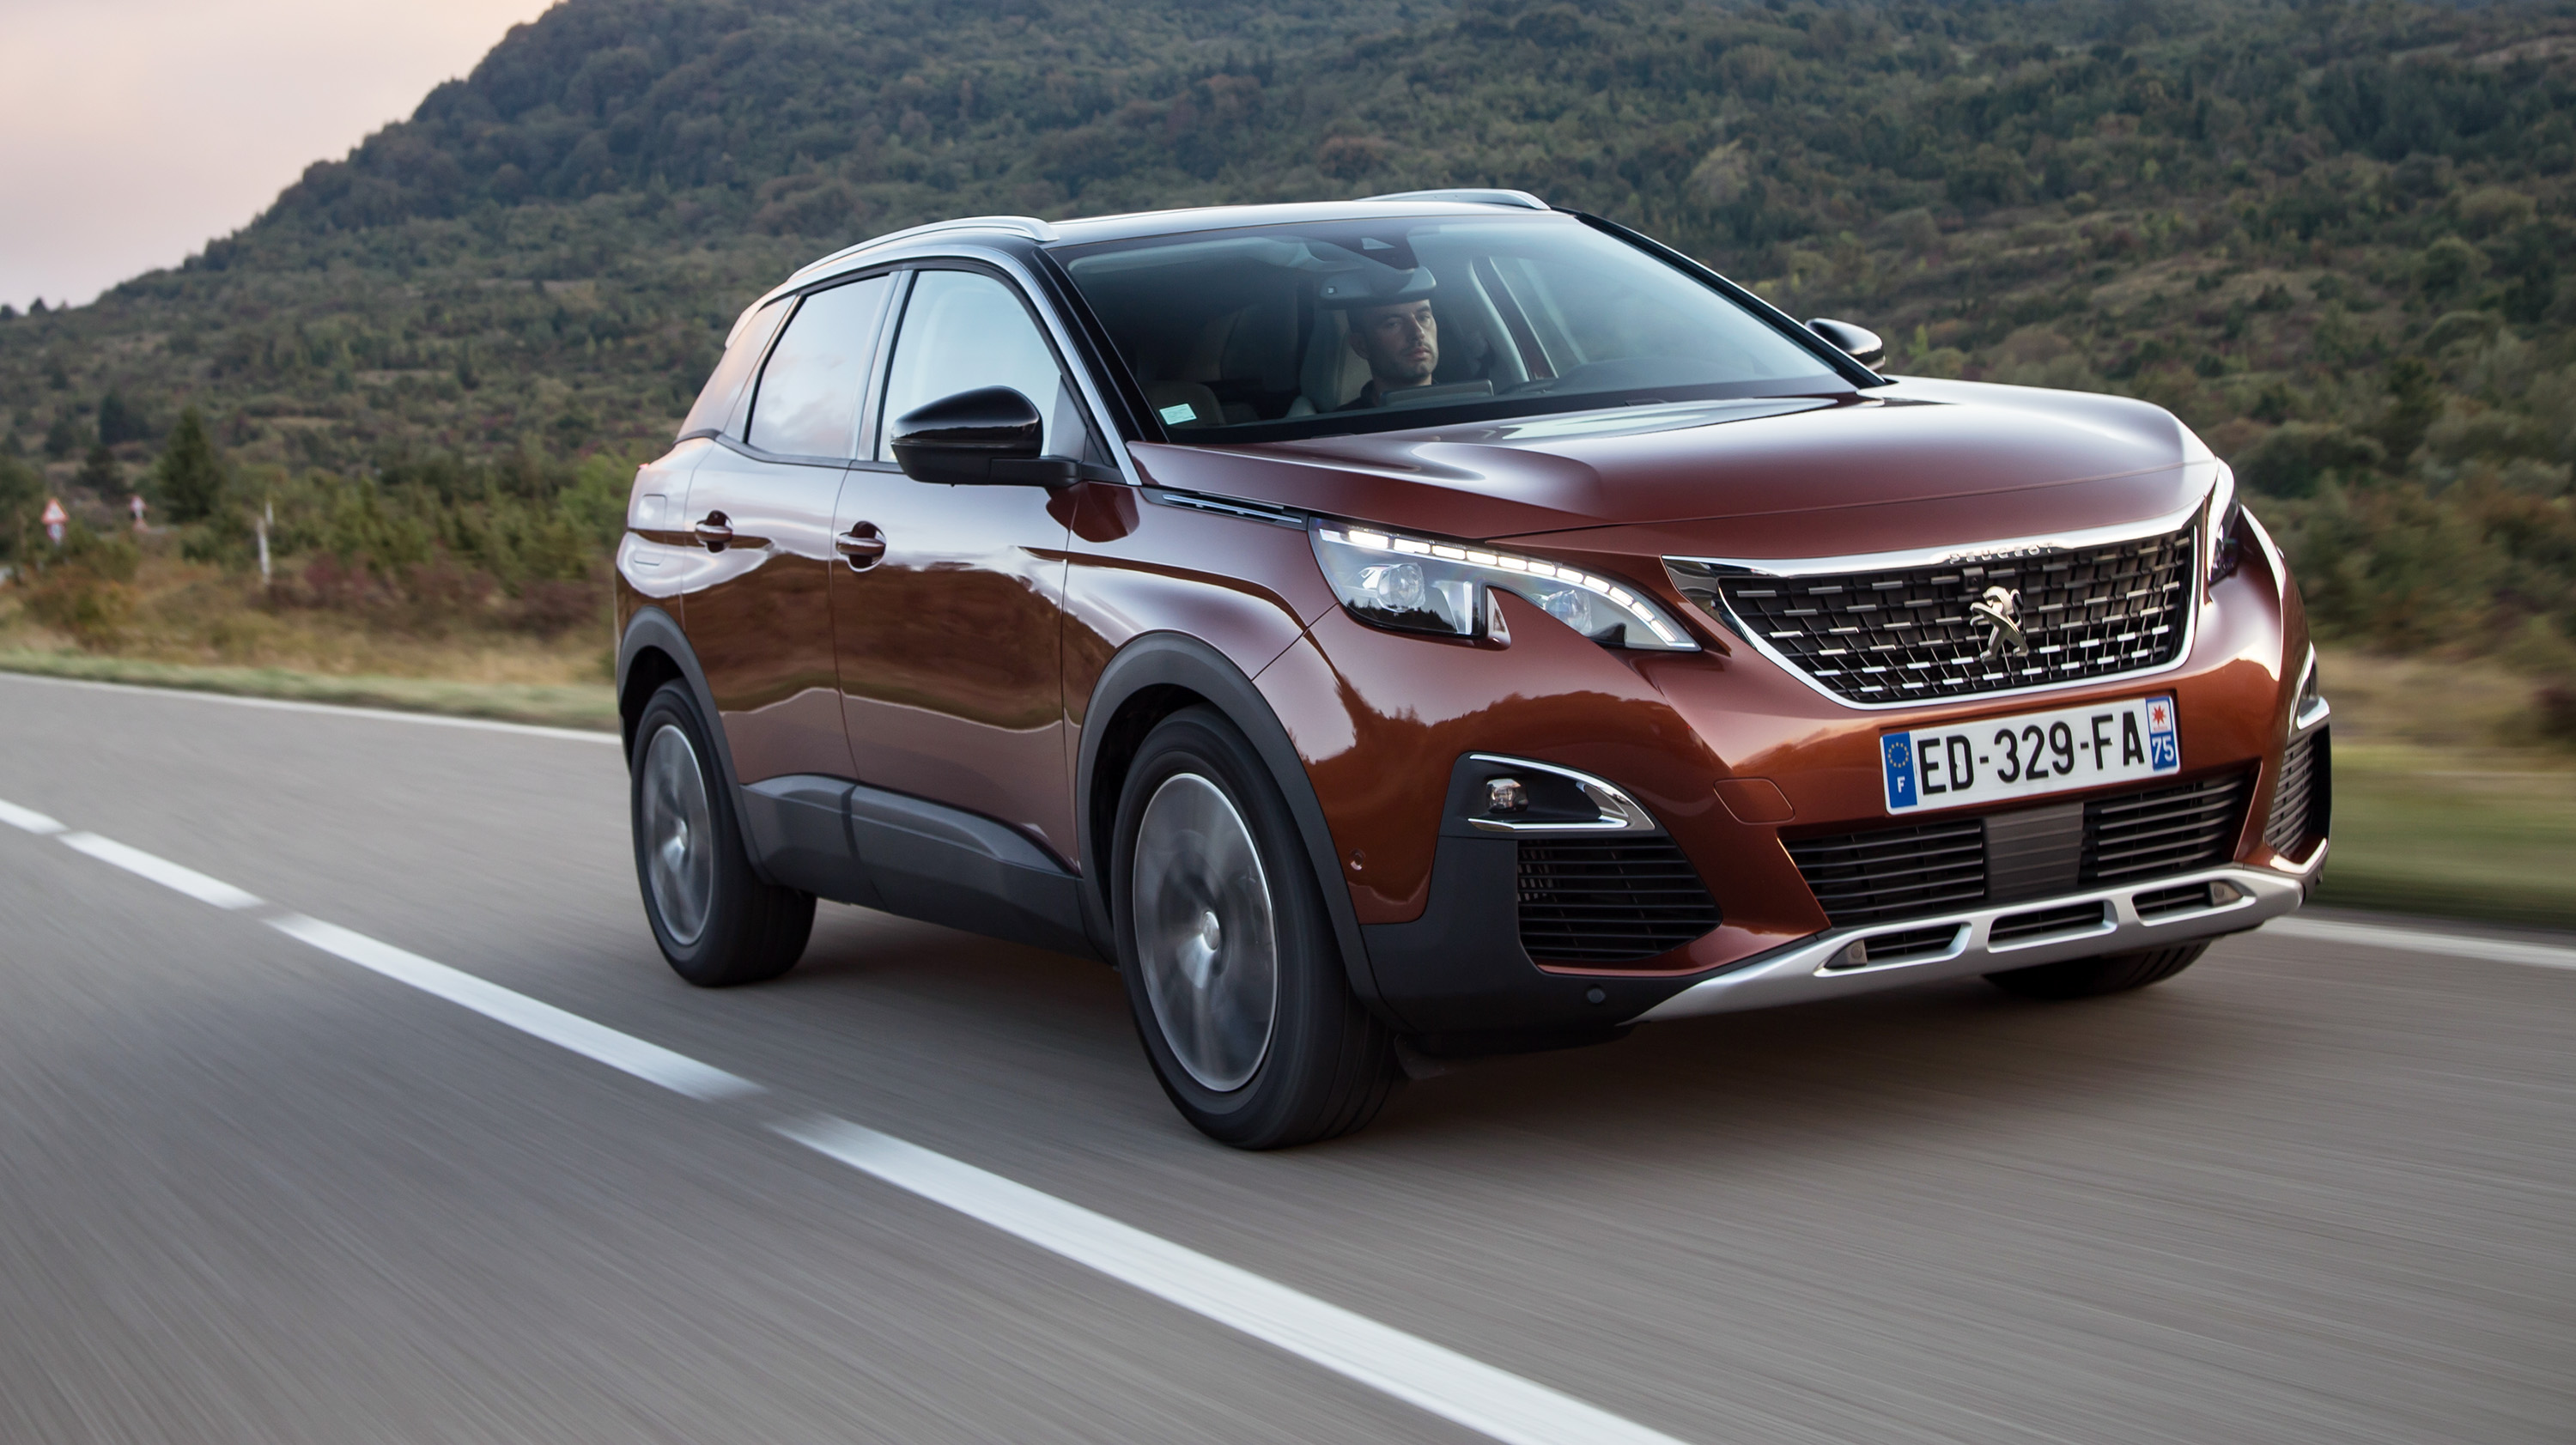 2018 Peugeot 3008 pricing and specs Newgen SUV touches